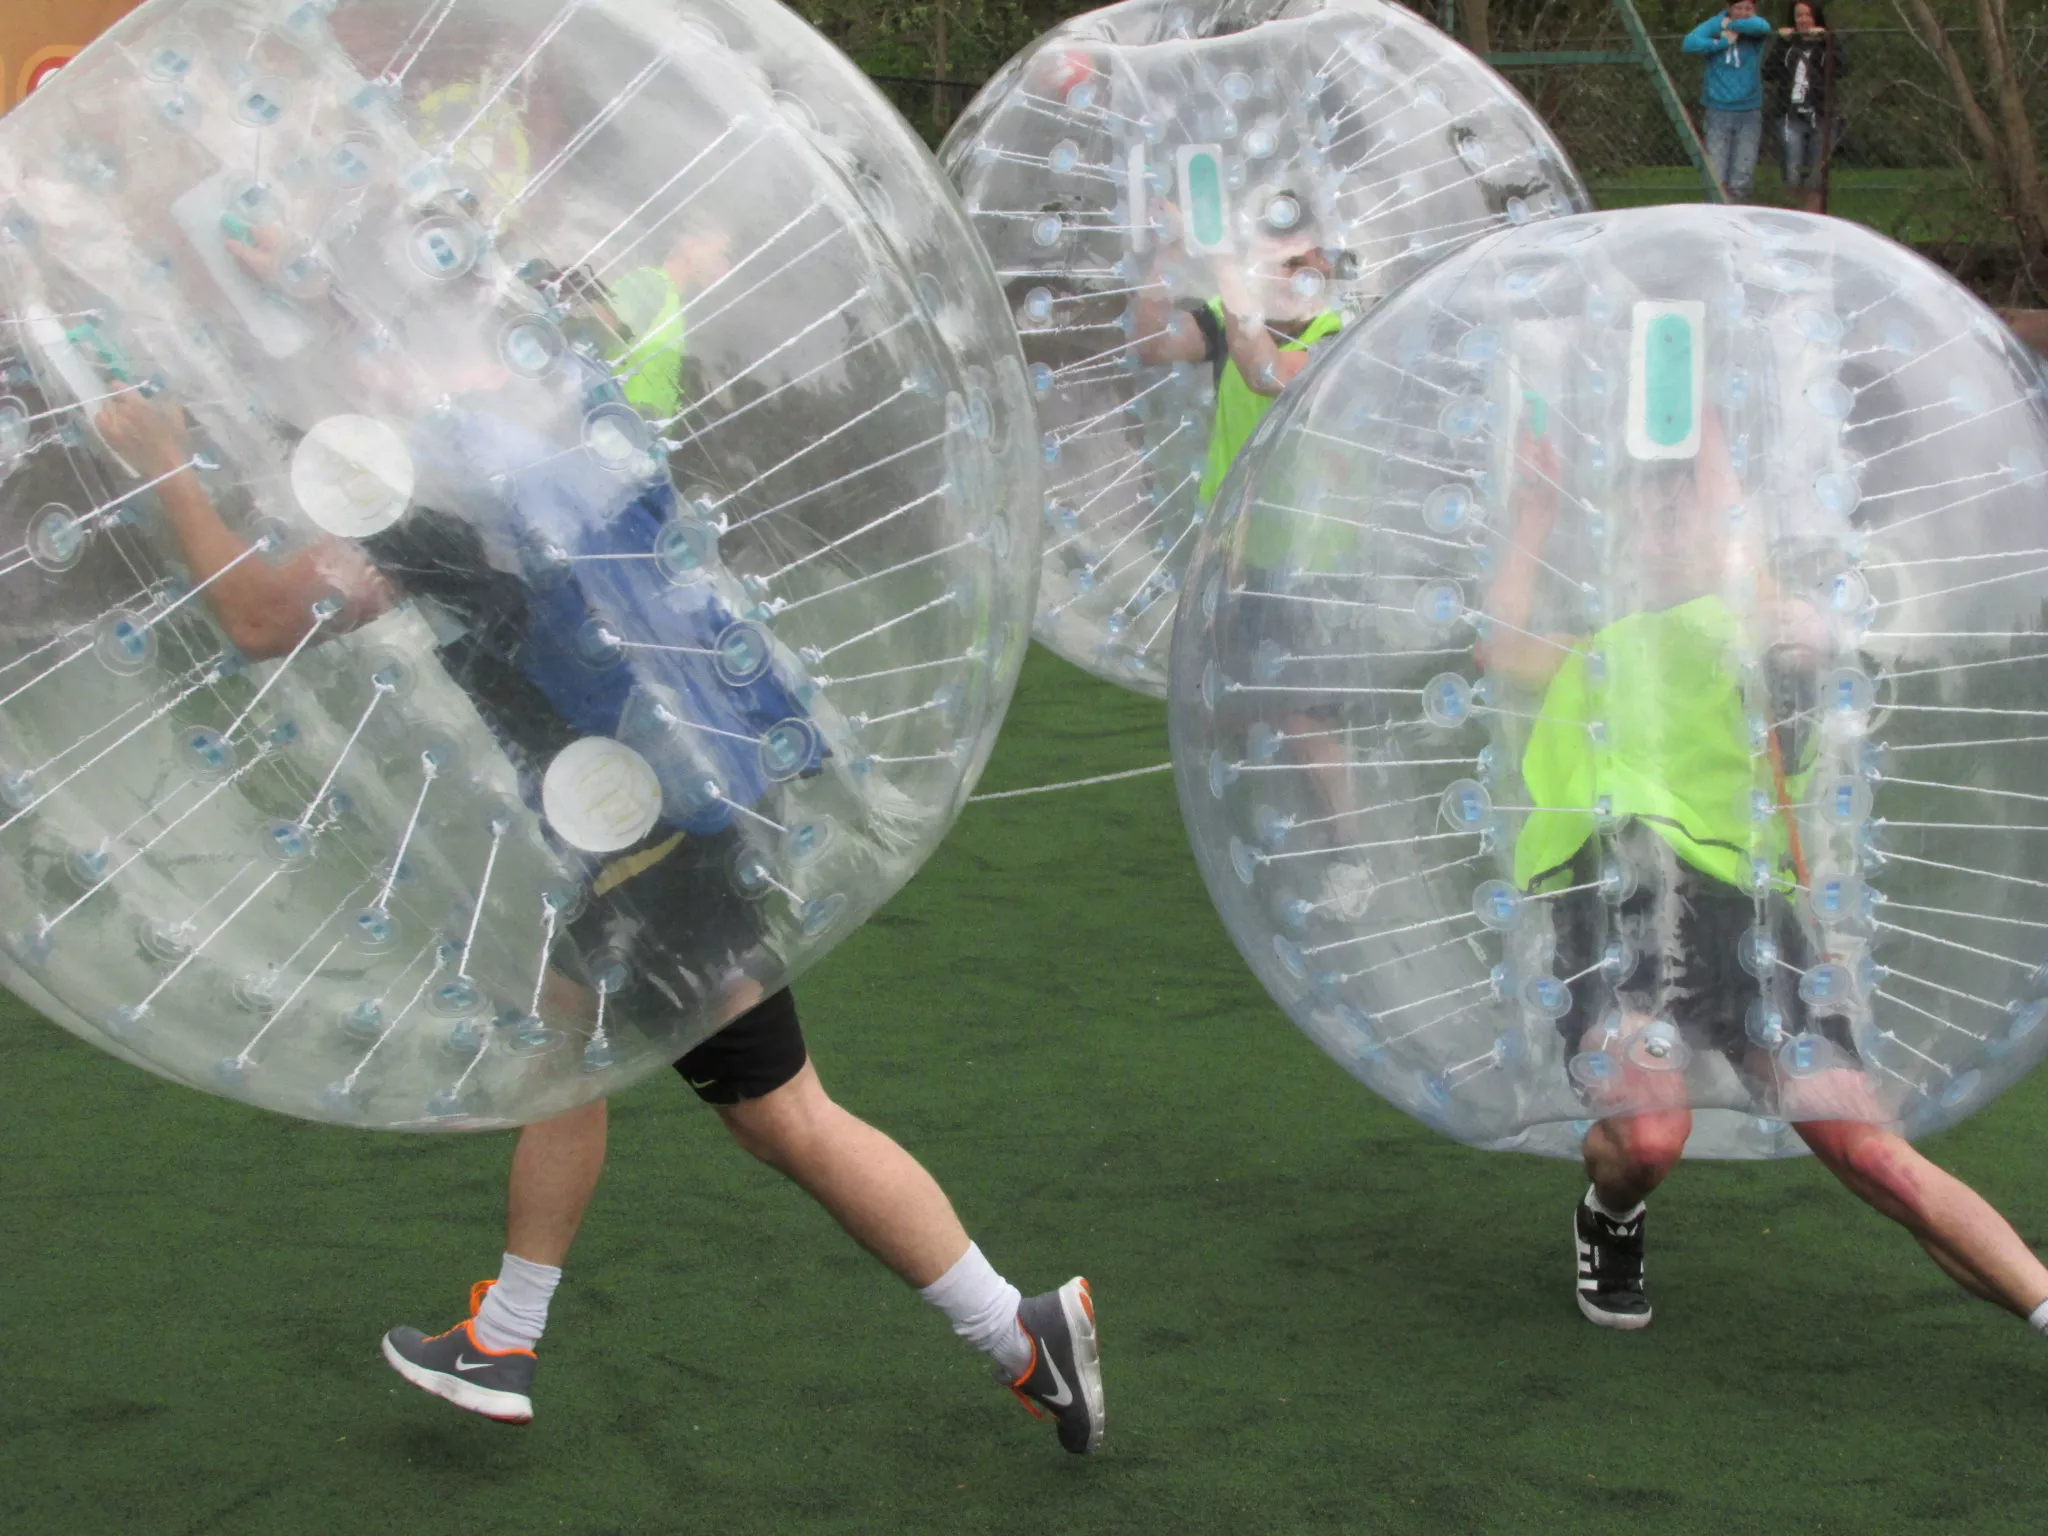 Teams playing Bubble football in Barcelona